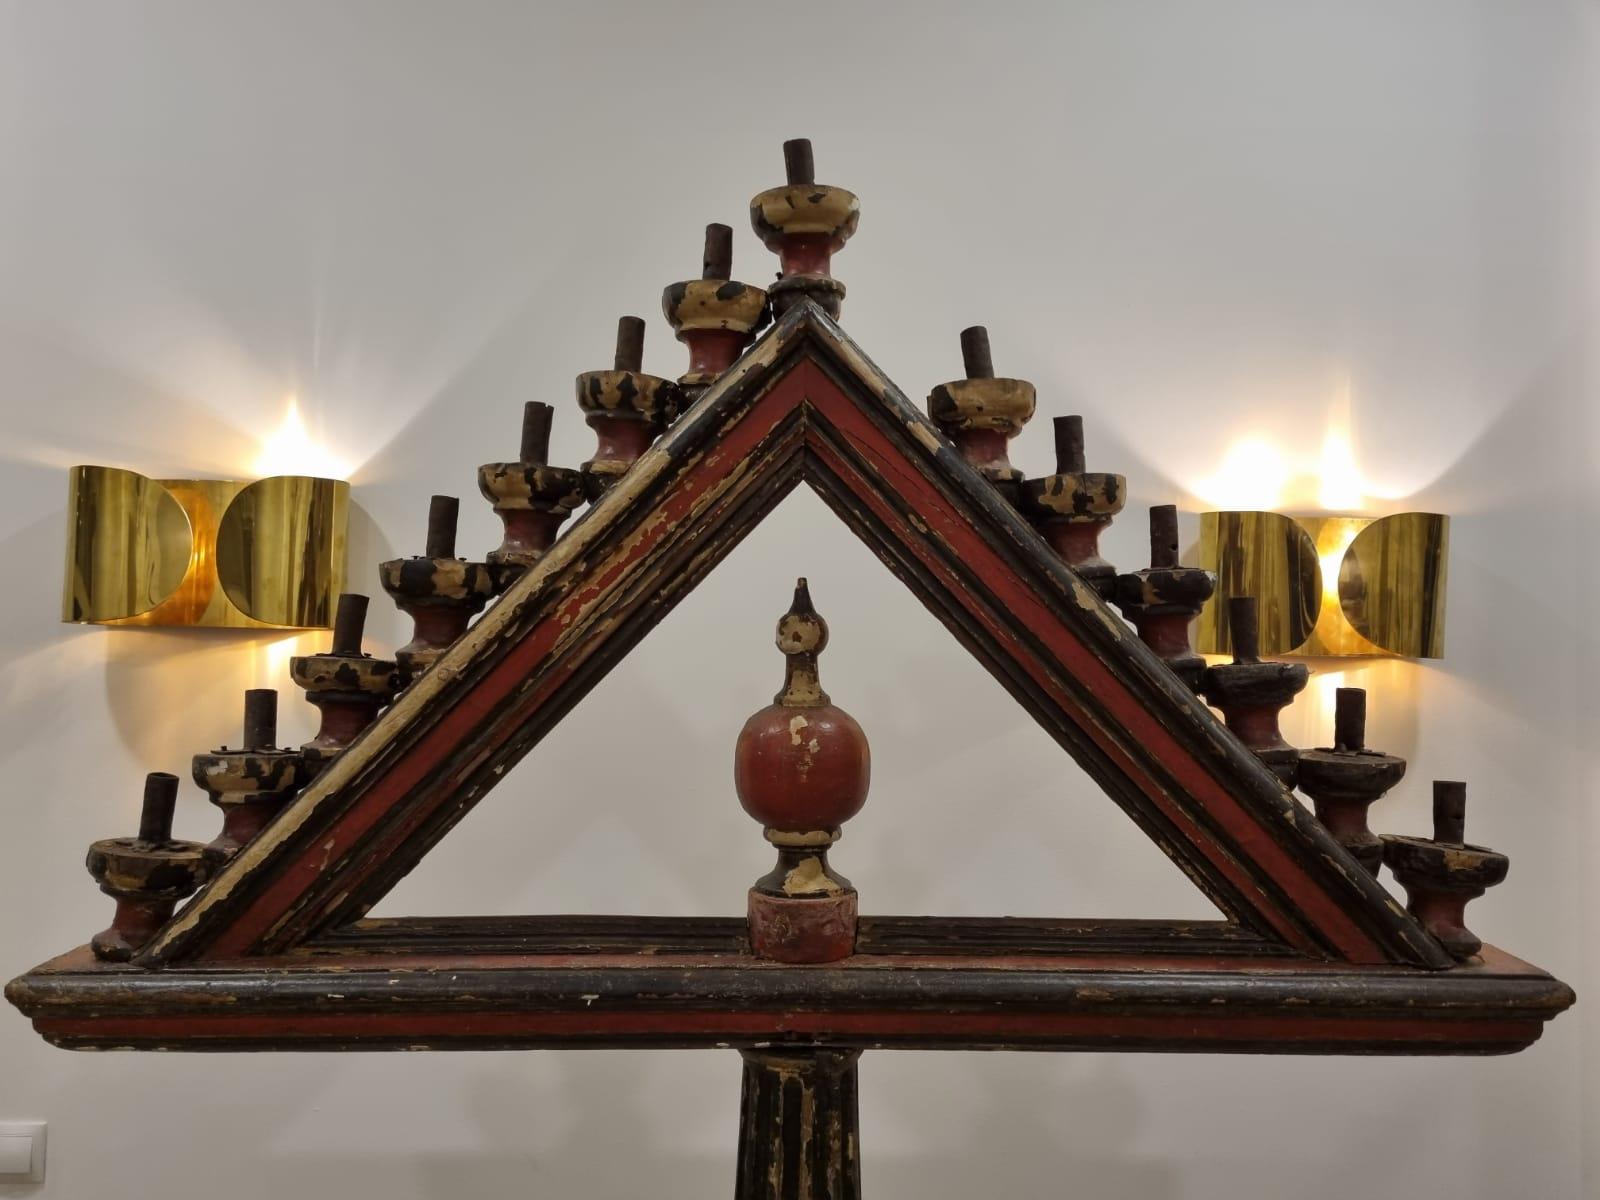 Renaissance era wooden candlestick date to the mid to late 1600’s. it was likely commissioned as altar candelabra for a French chapel. over 90in. tall, beautiful wide stance, original condition, age separations, some losses of motifs, abrasions, and